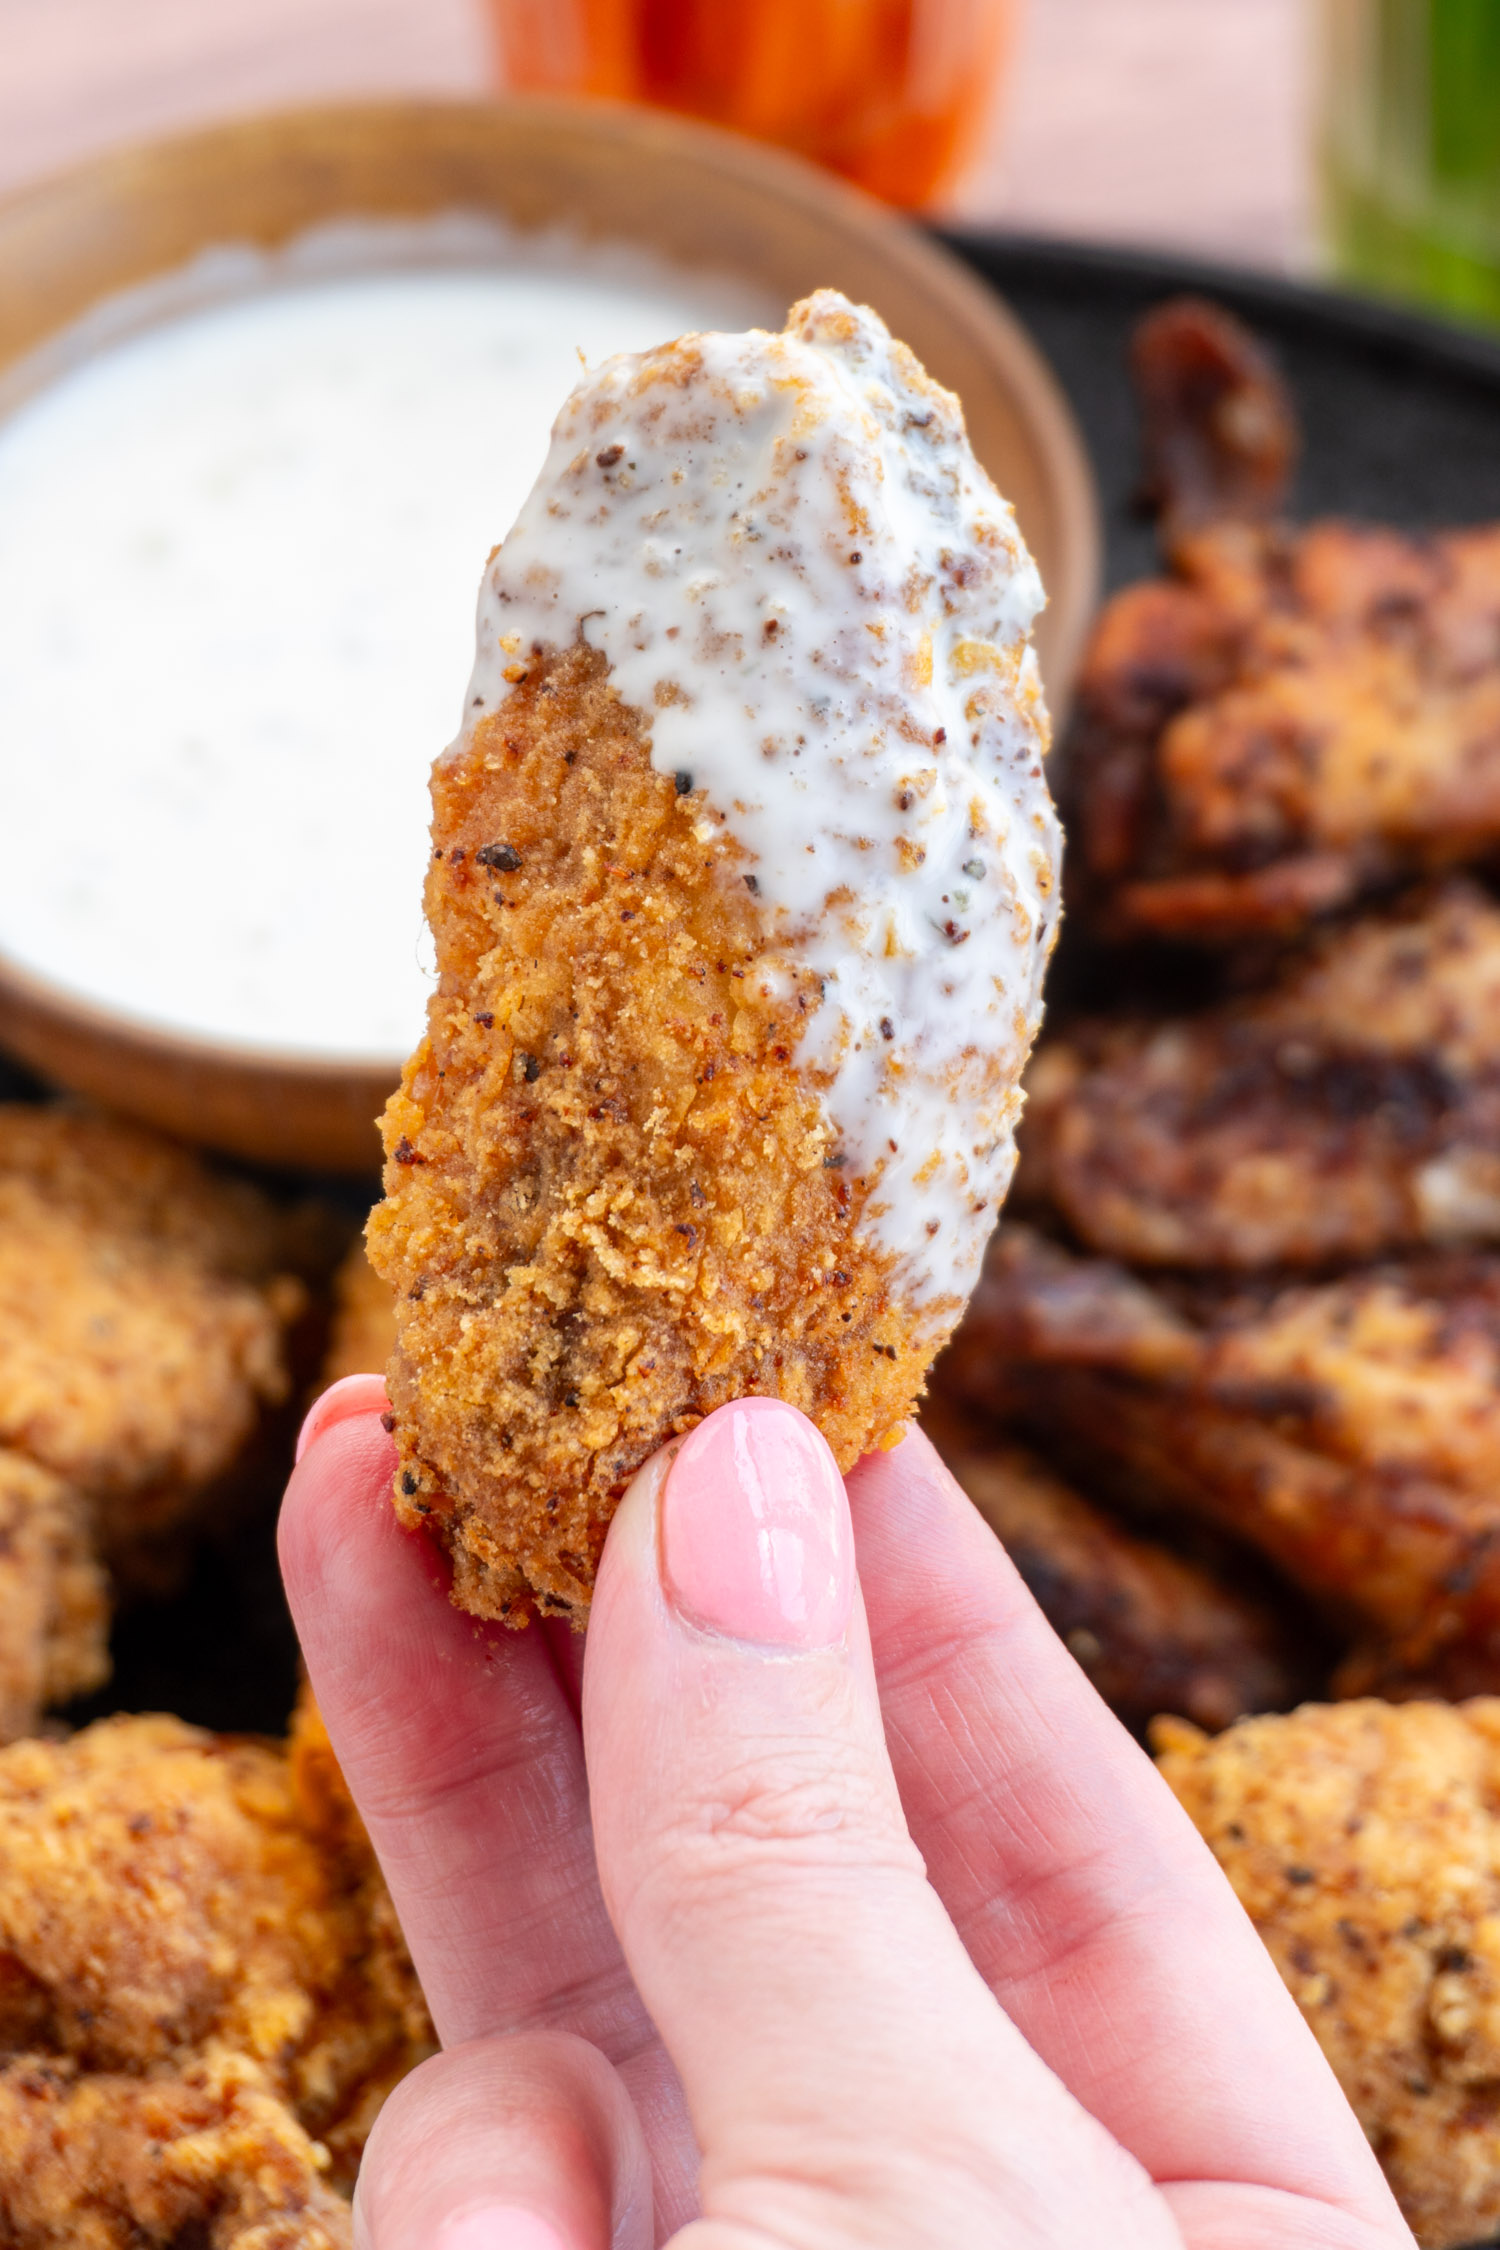 a crispy chicken wing up close, fried to golden brown and dipped in ranch dressing.